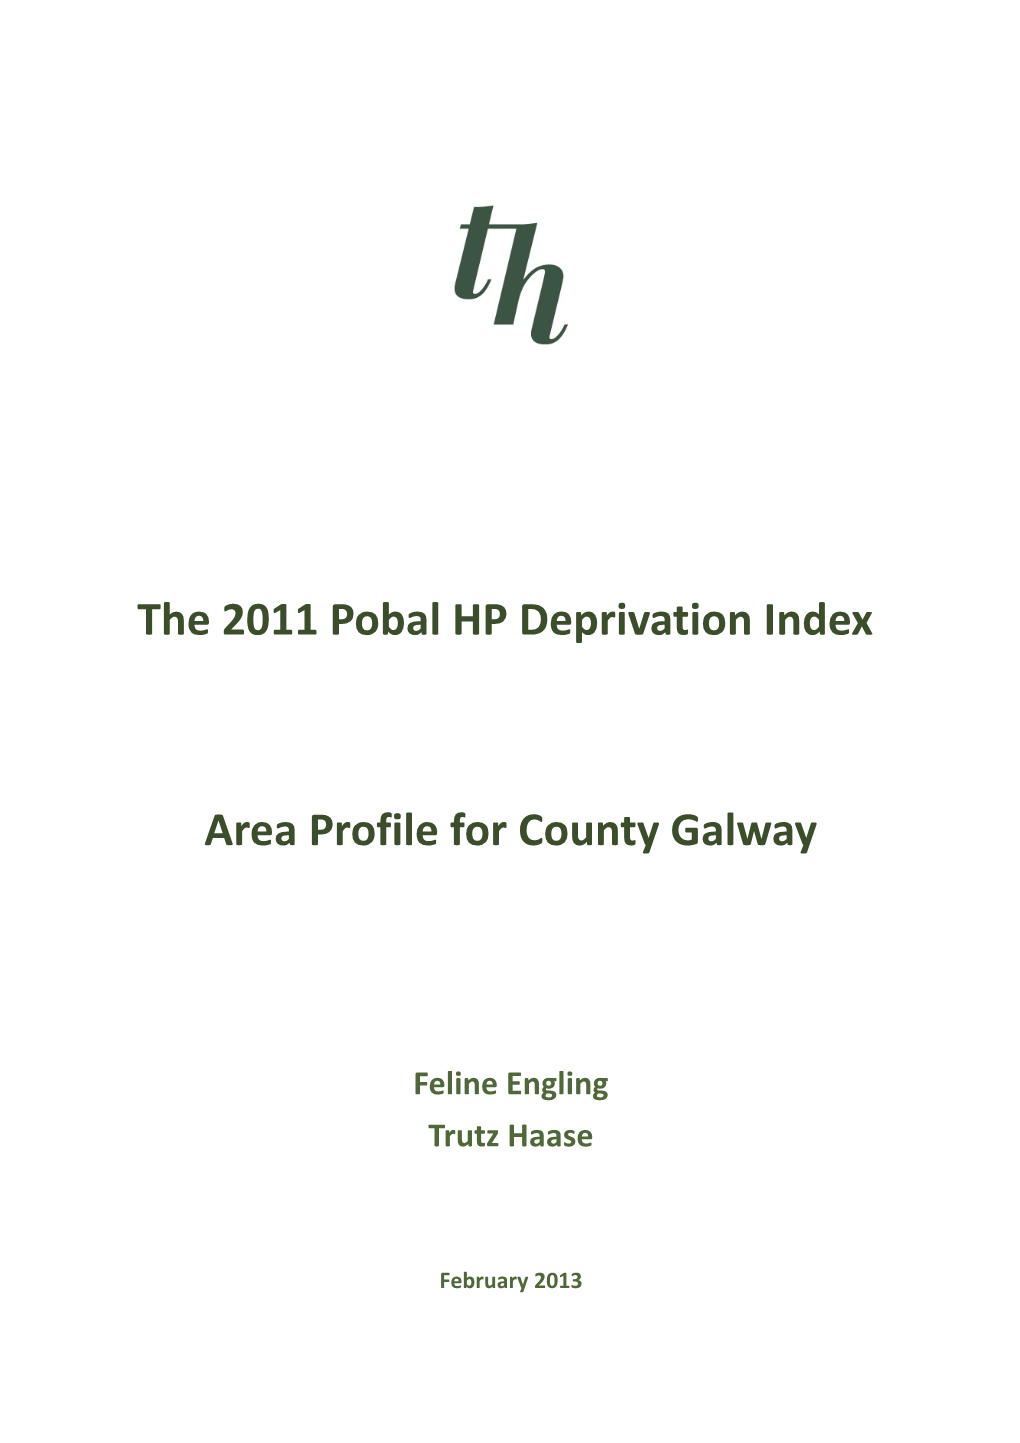 The 2011 Pobal HP Deprivation Index